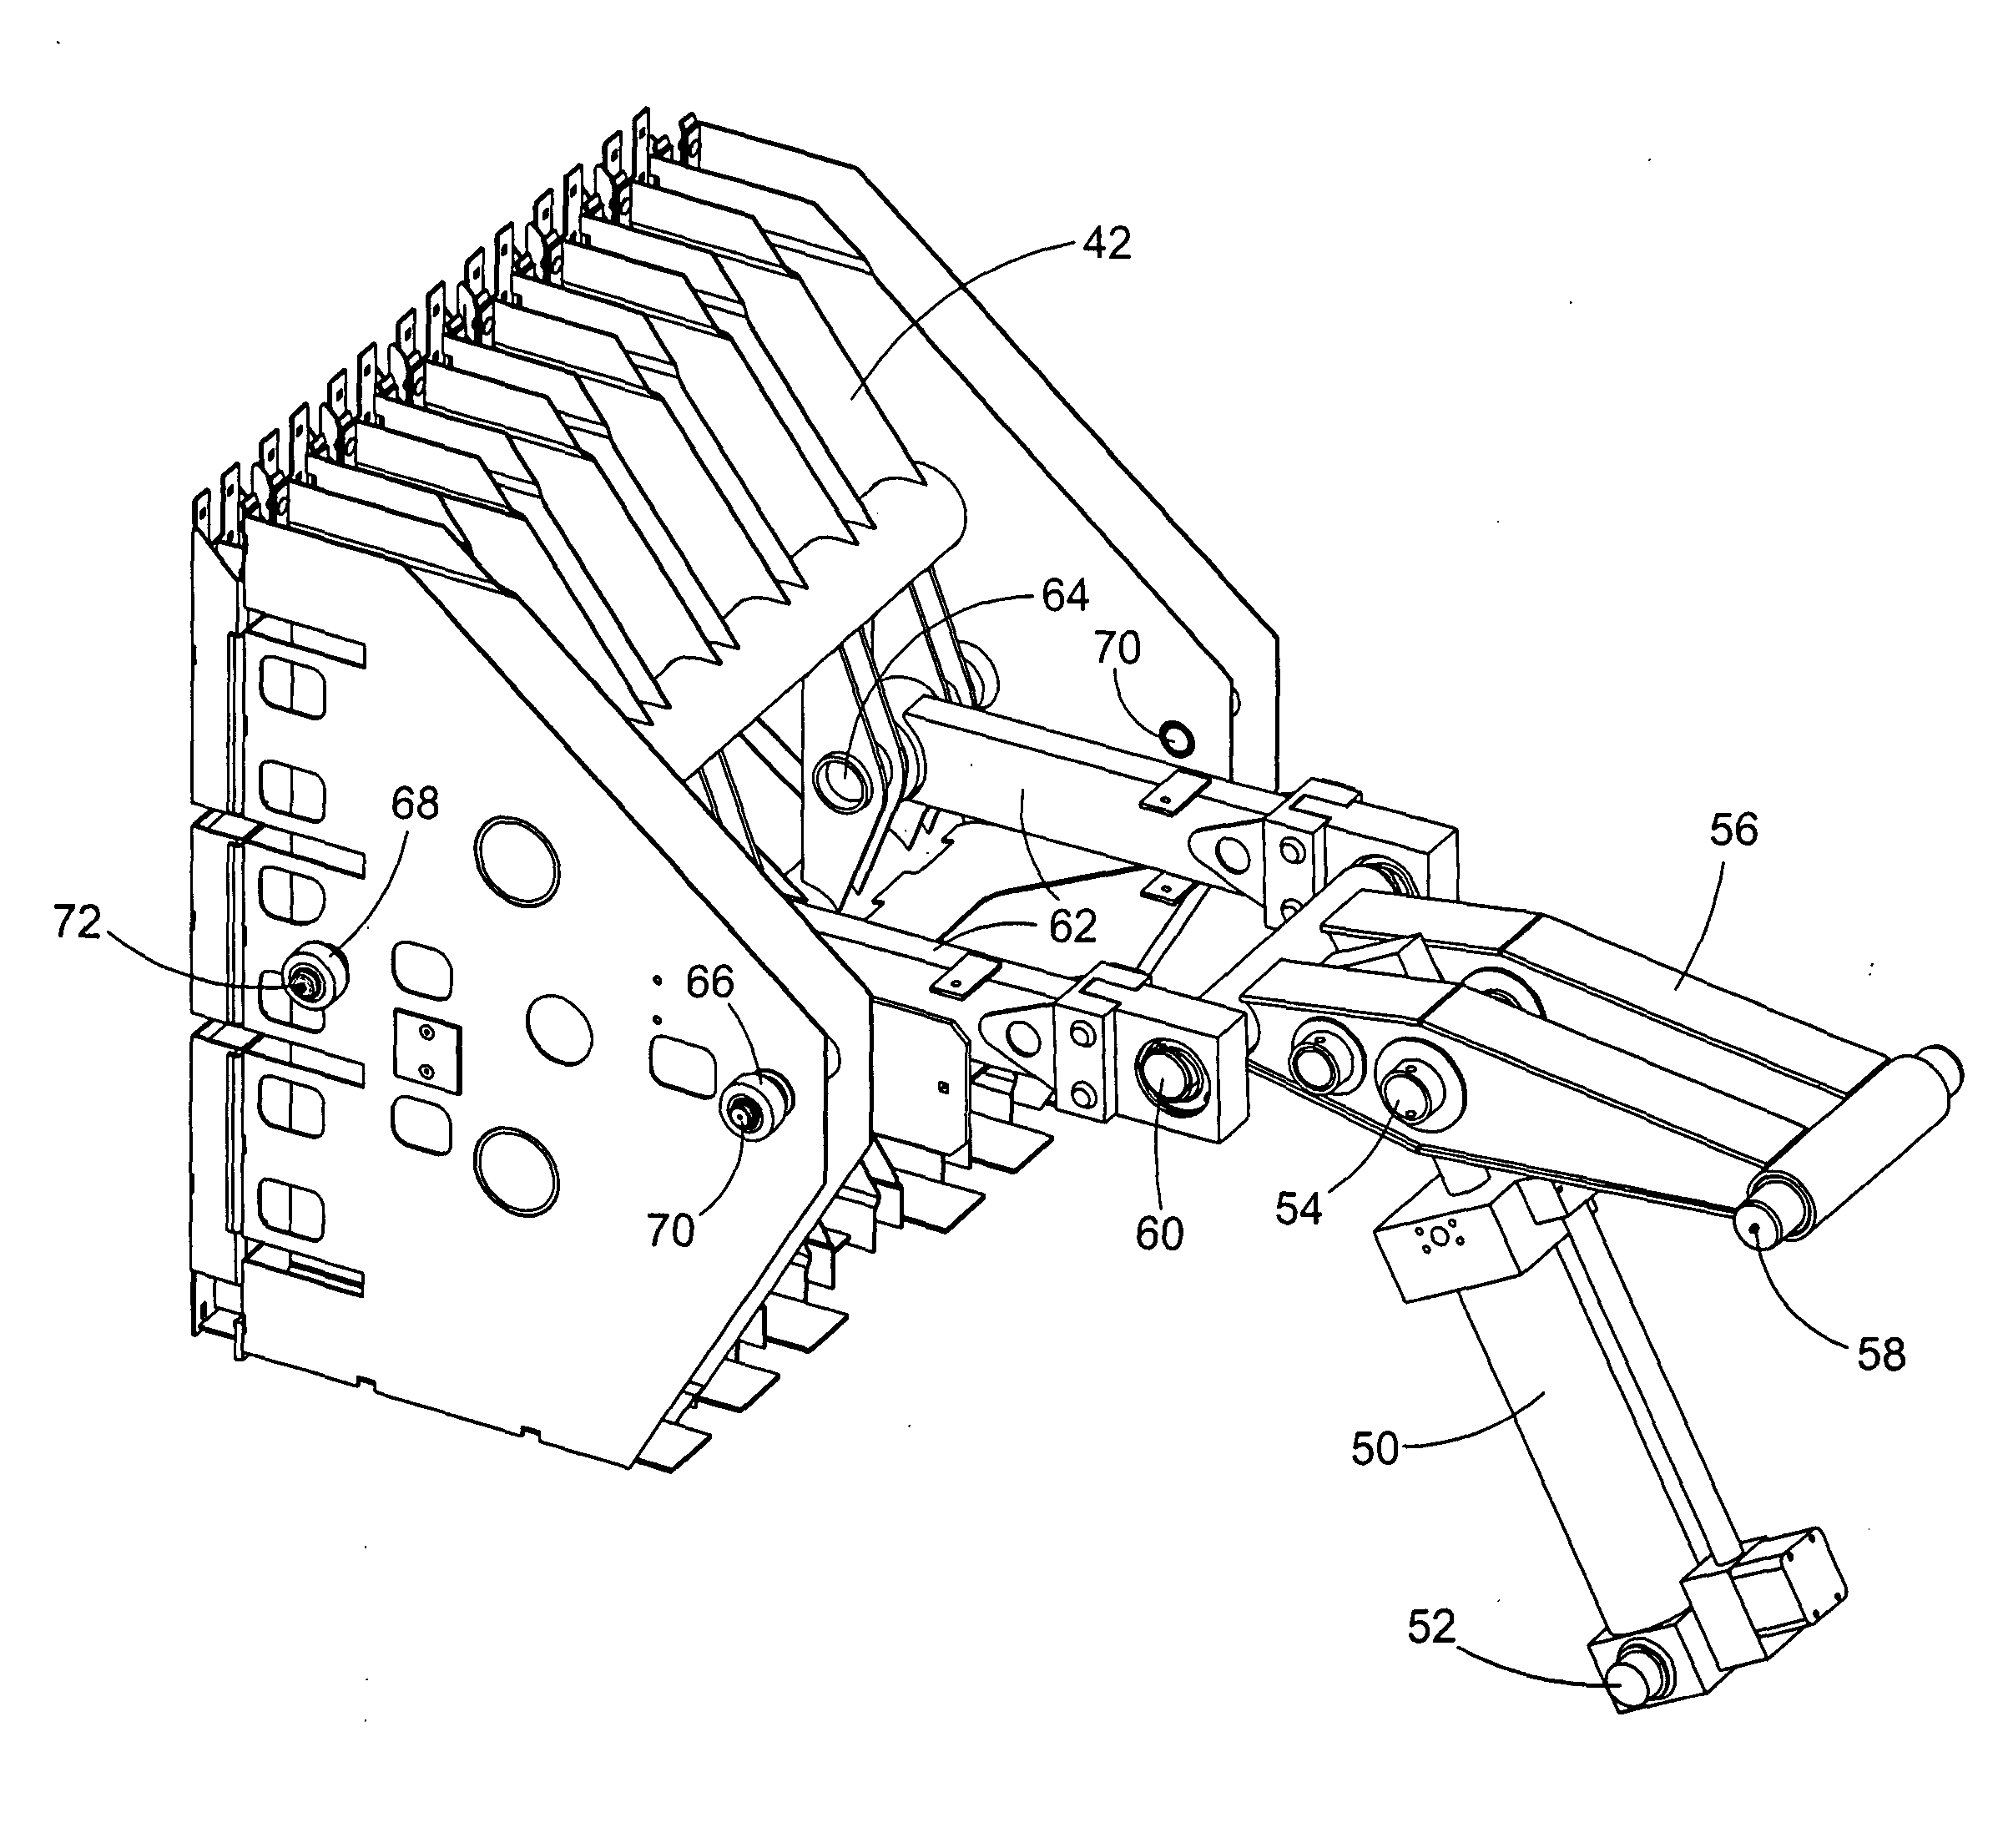 Baler plunger drive load measurement pin offset from either connecting rod center line or horizontal mid-plane of baling chamber